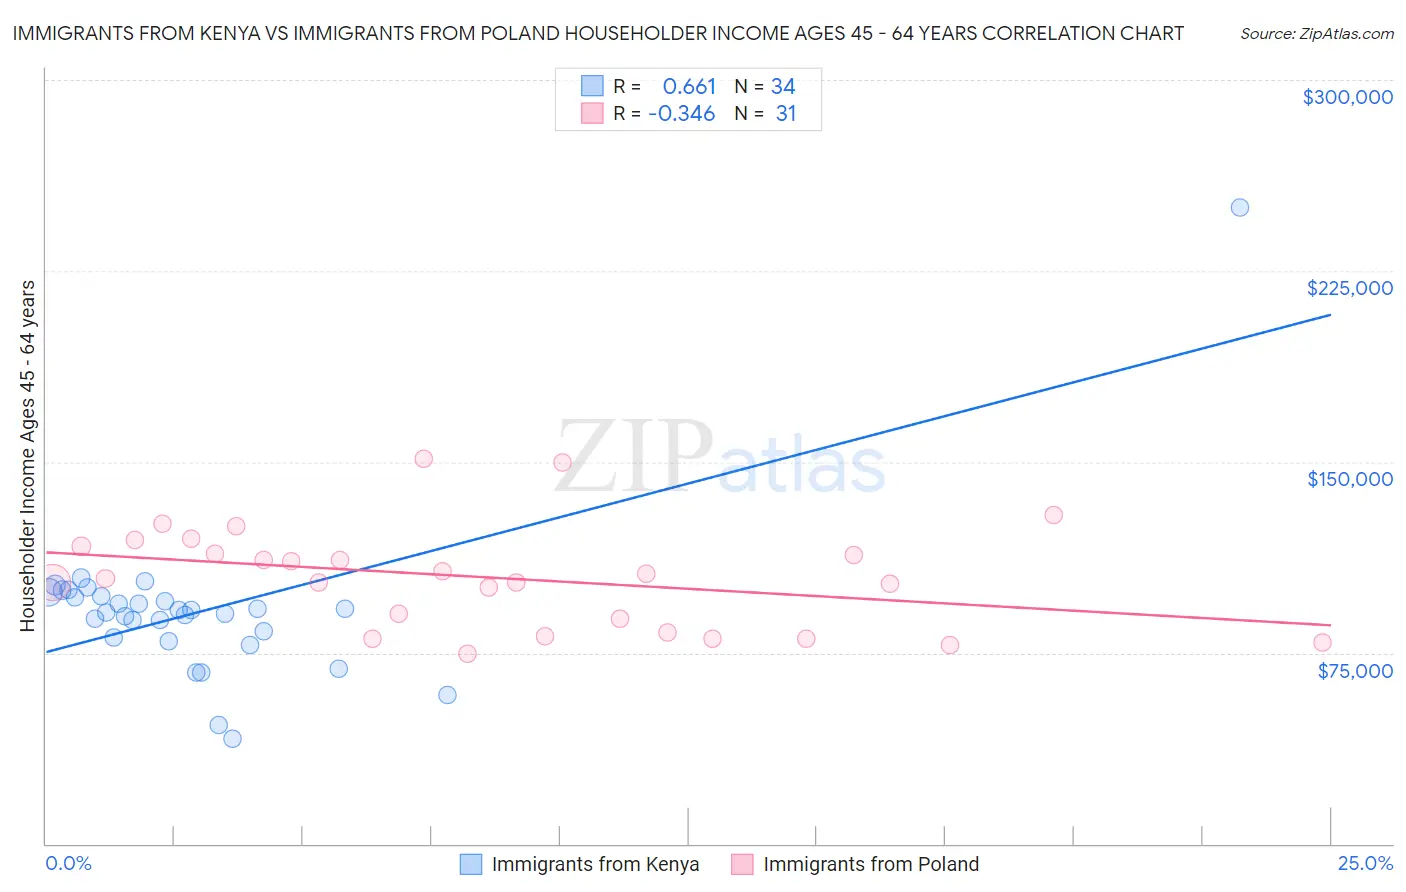 Immigrants from Kenya vs Immigrants from Poland Householder Income Ages 45 - 64 years